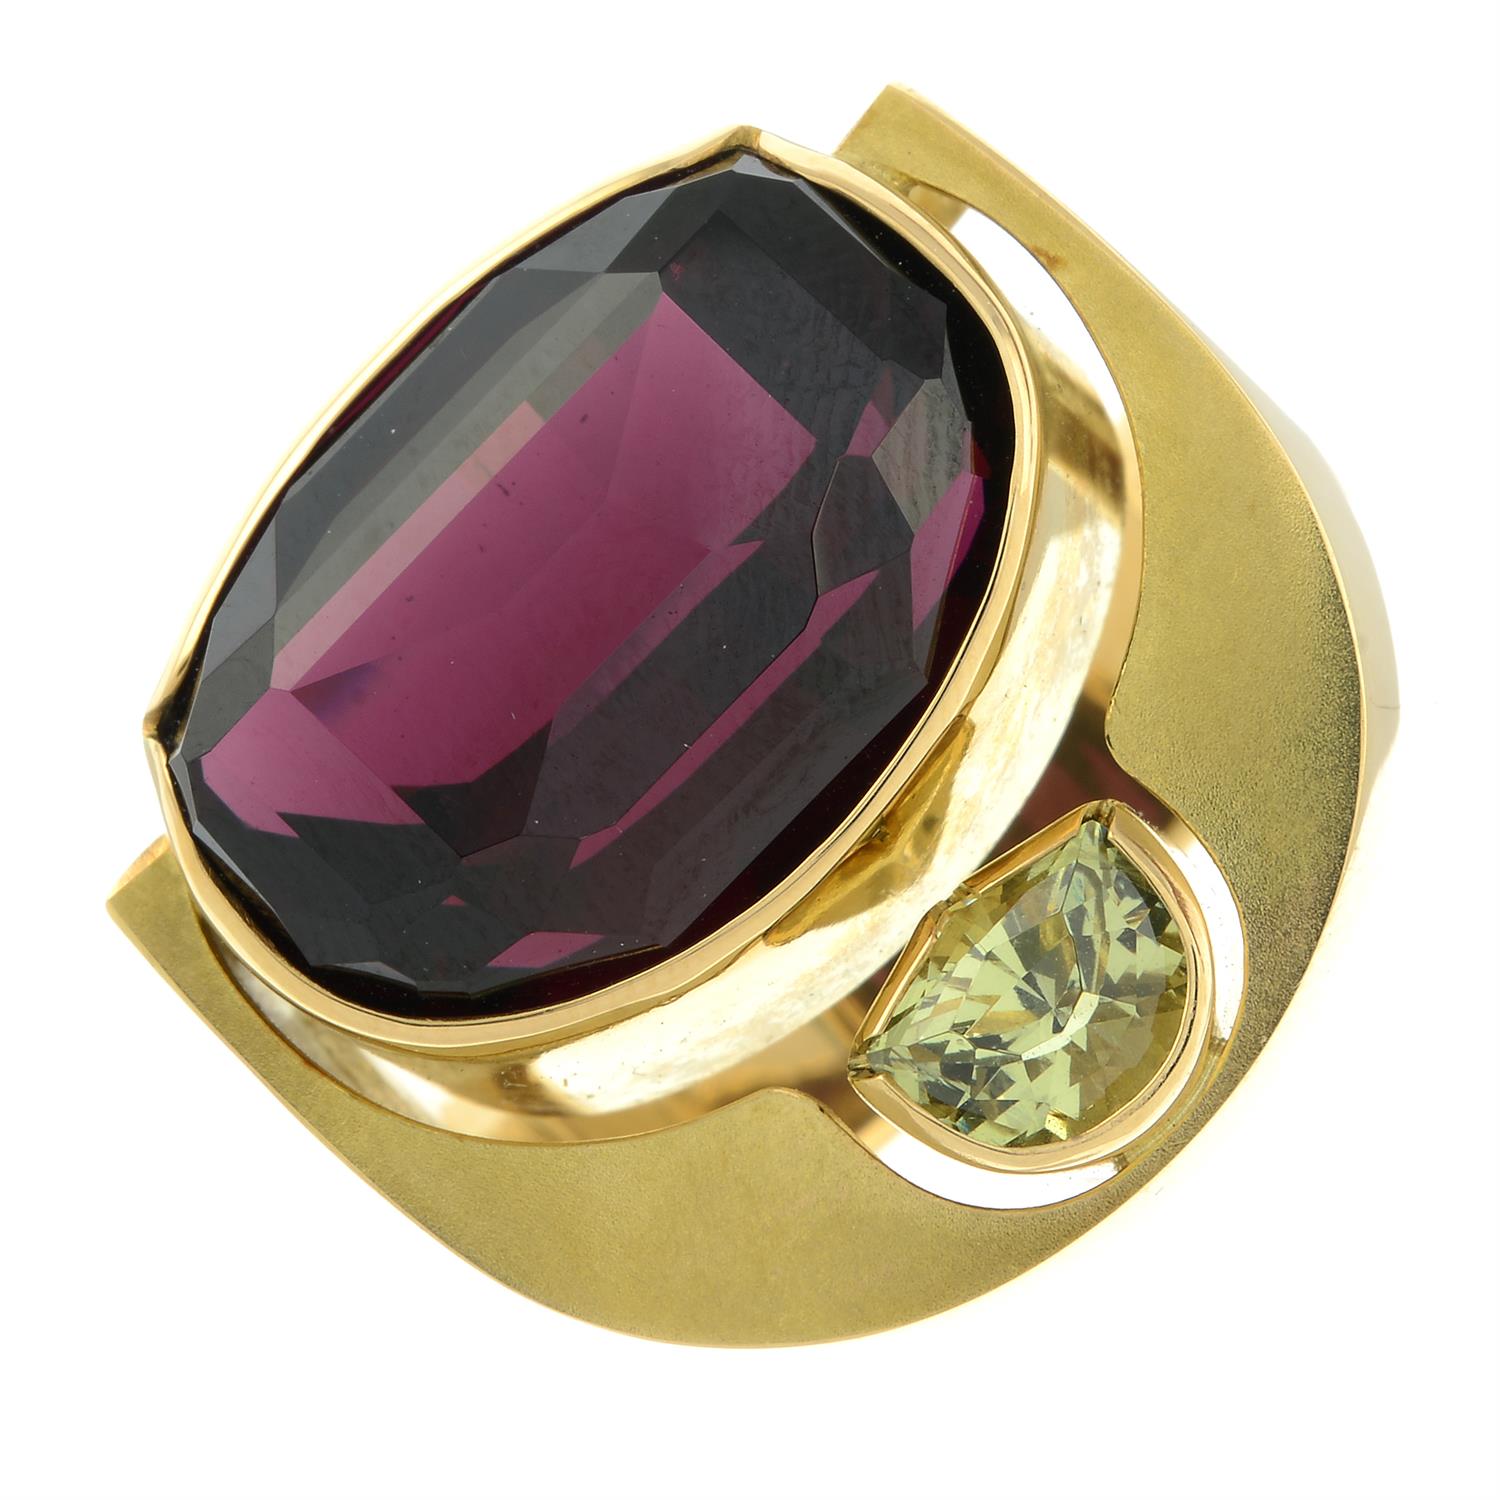 An 18ct gold red and green garnet dress ring, by Erwin Springbrunn.